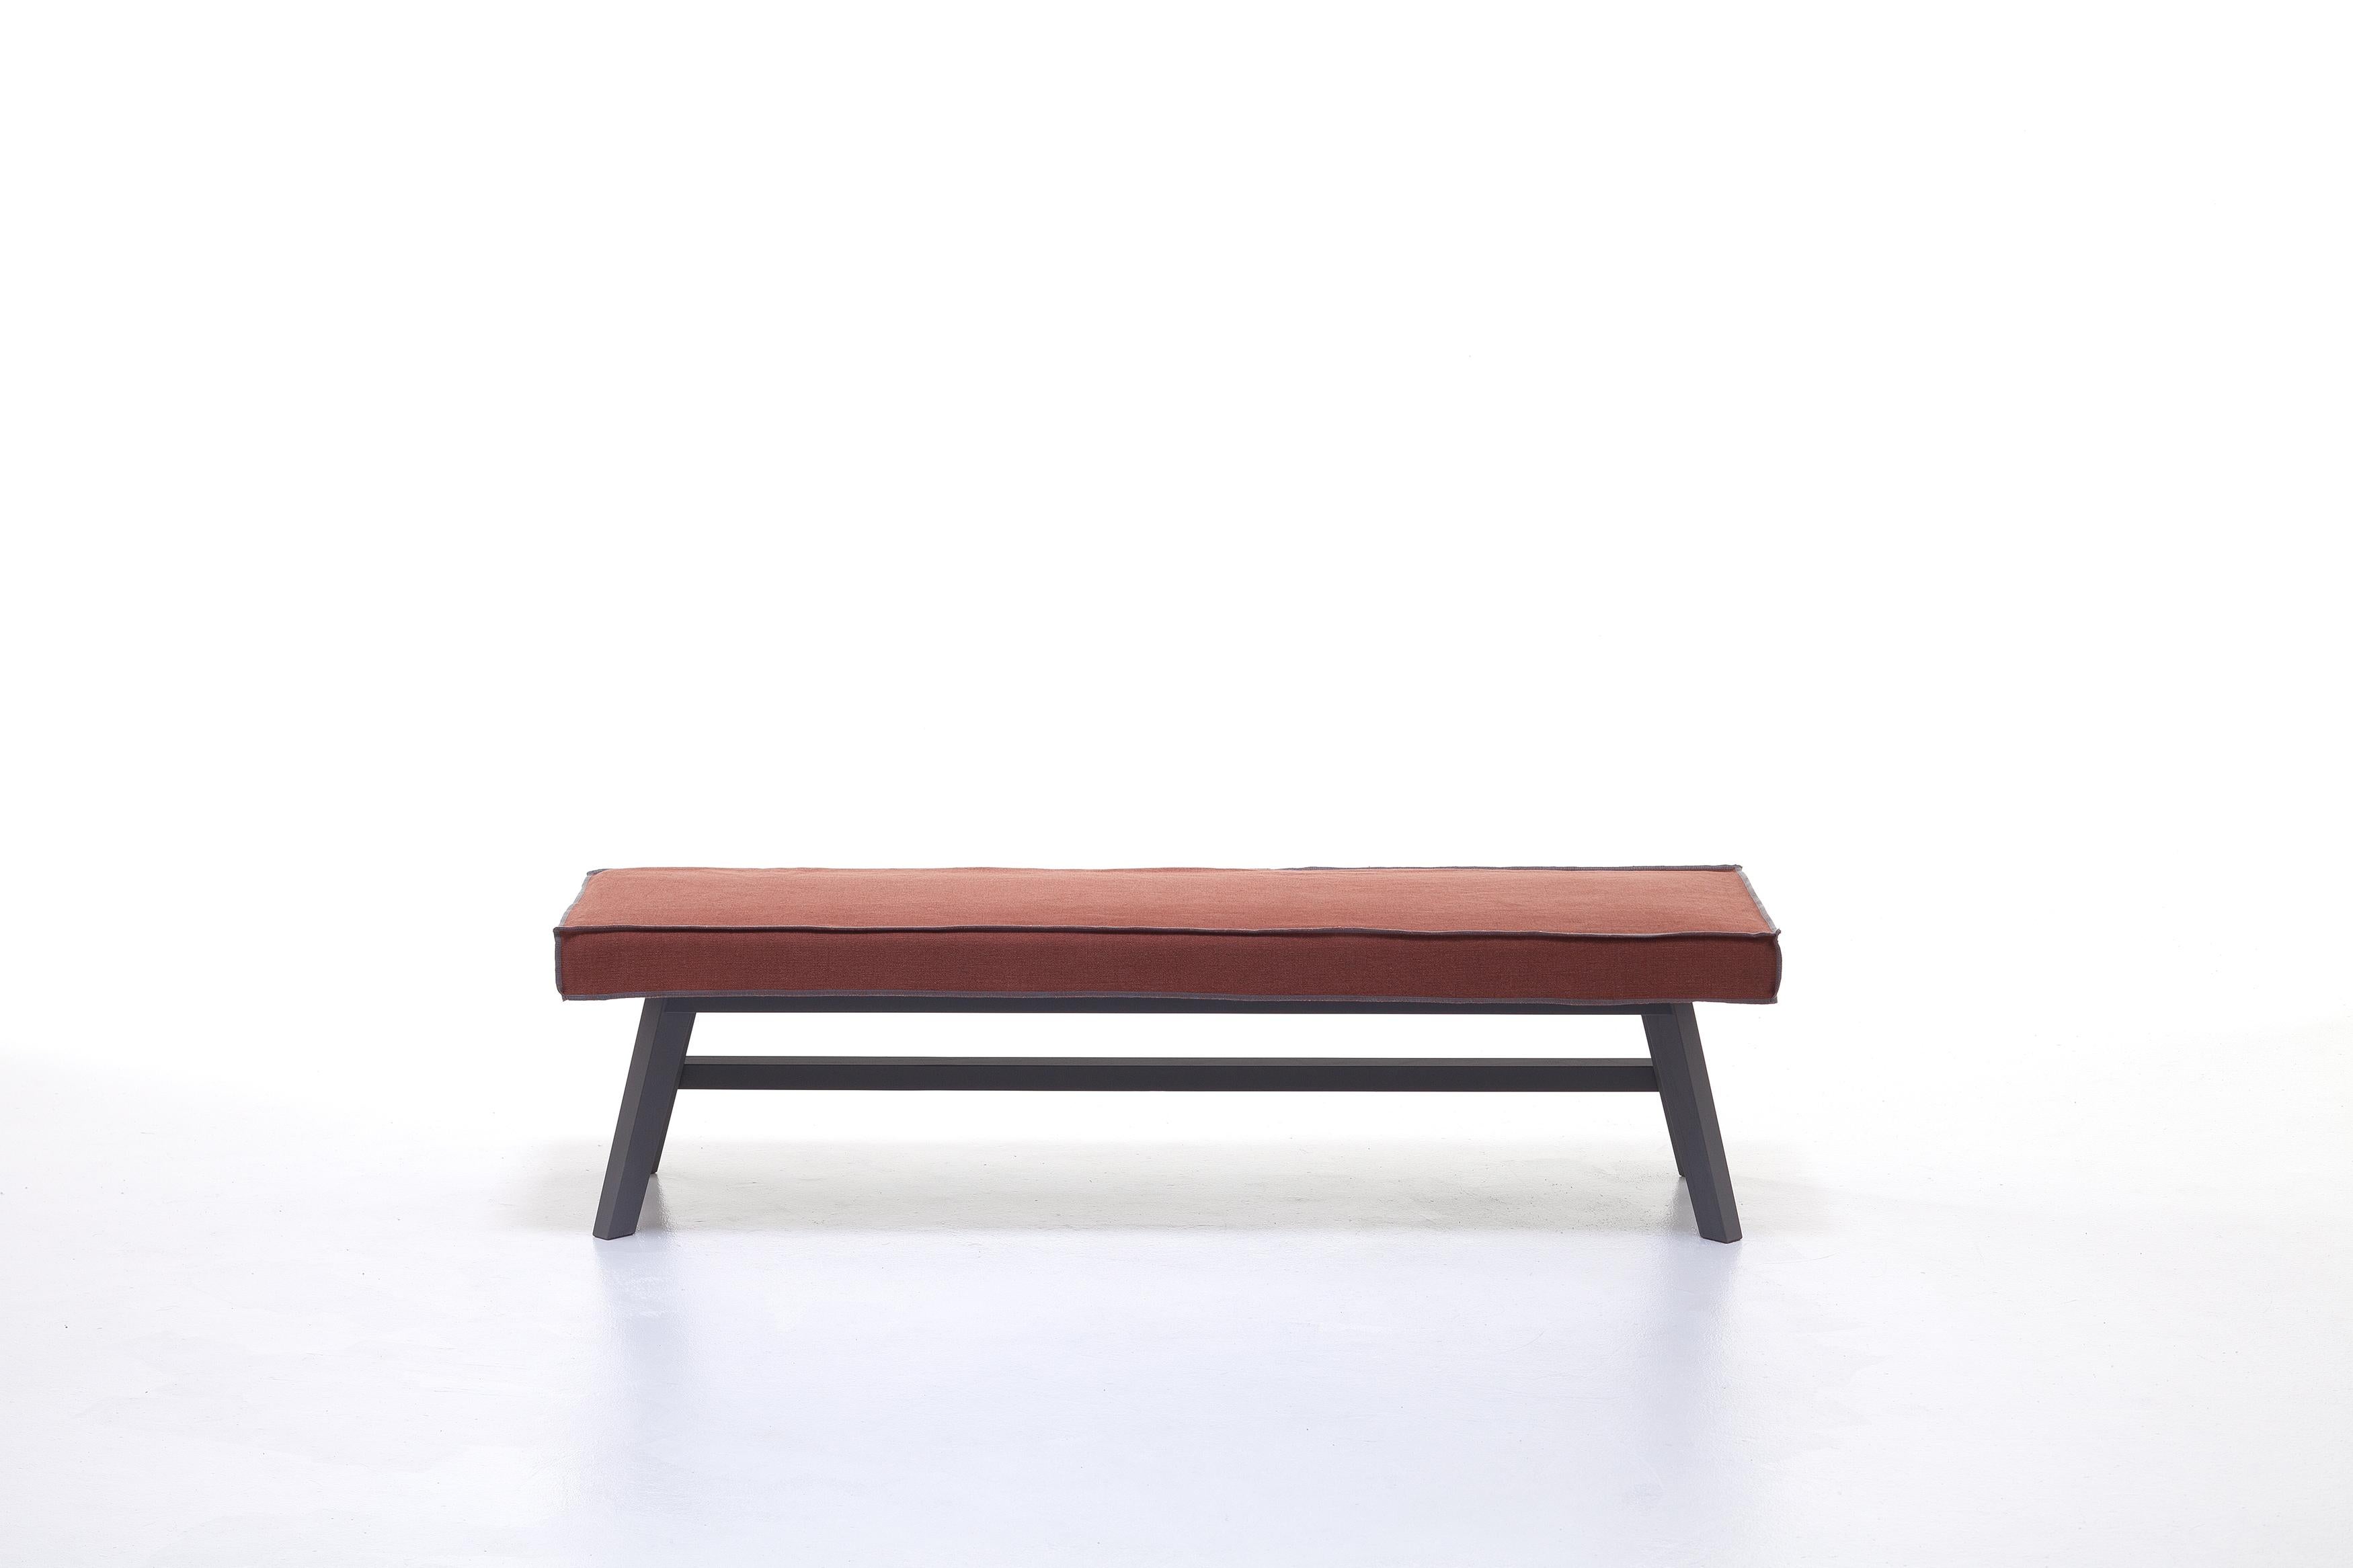 Classic and simple furniture, the Gray 15 bench has a padded seat in polyurethane foam, with a removable cover enriched by the visible stitching that further outlines the strong geometry of this product. The structure is in natural painted Canaletto